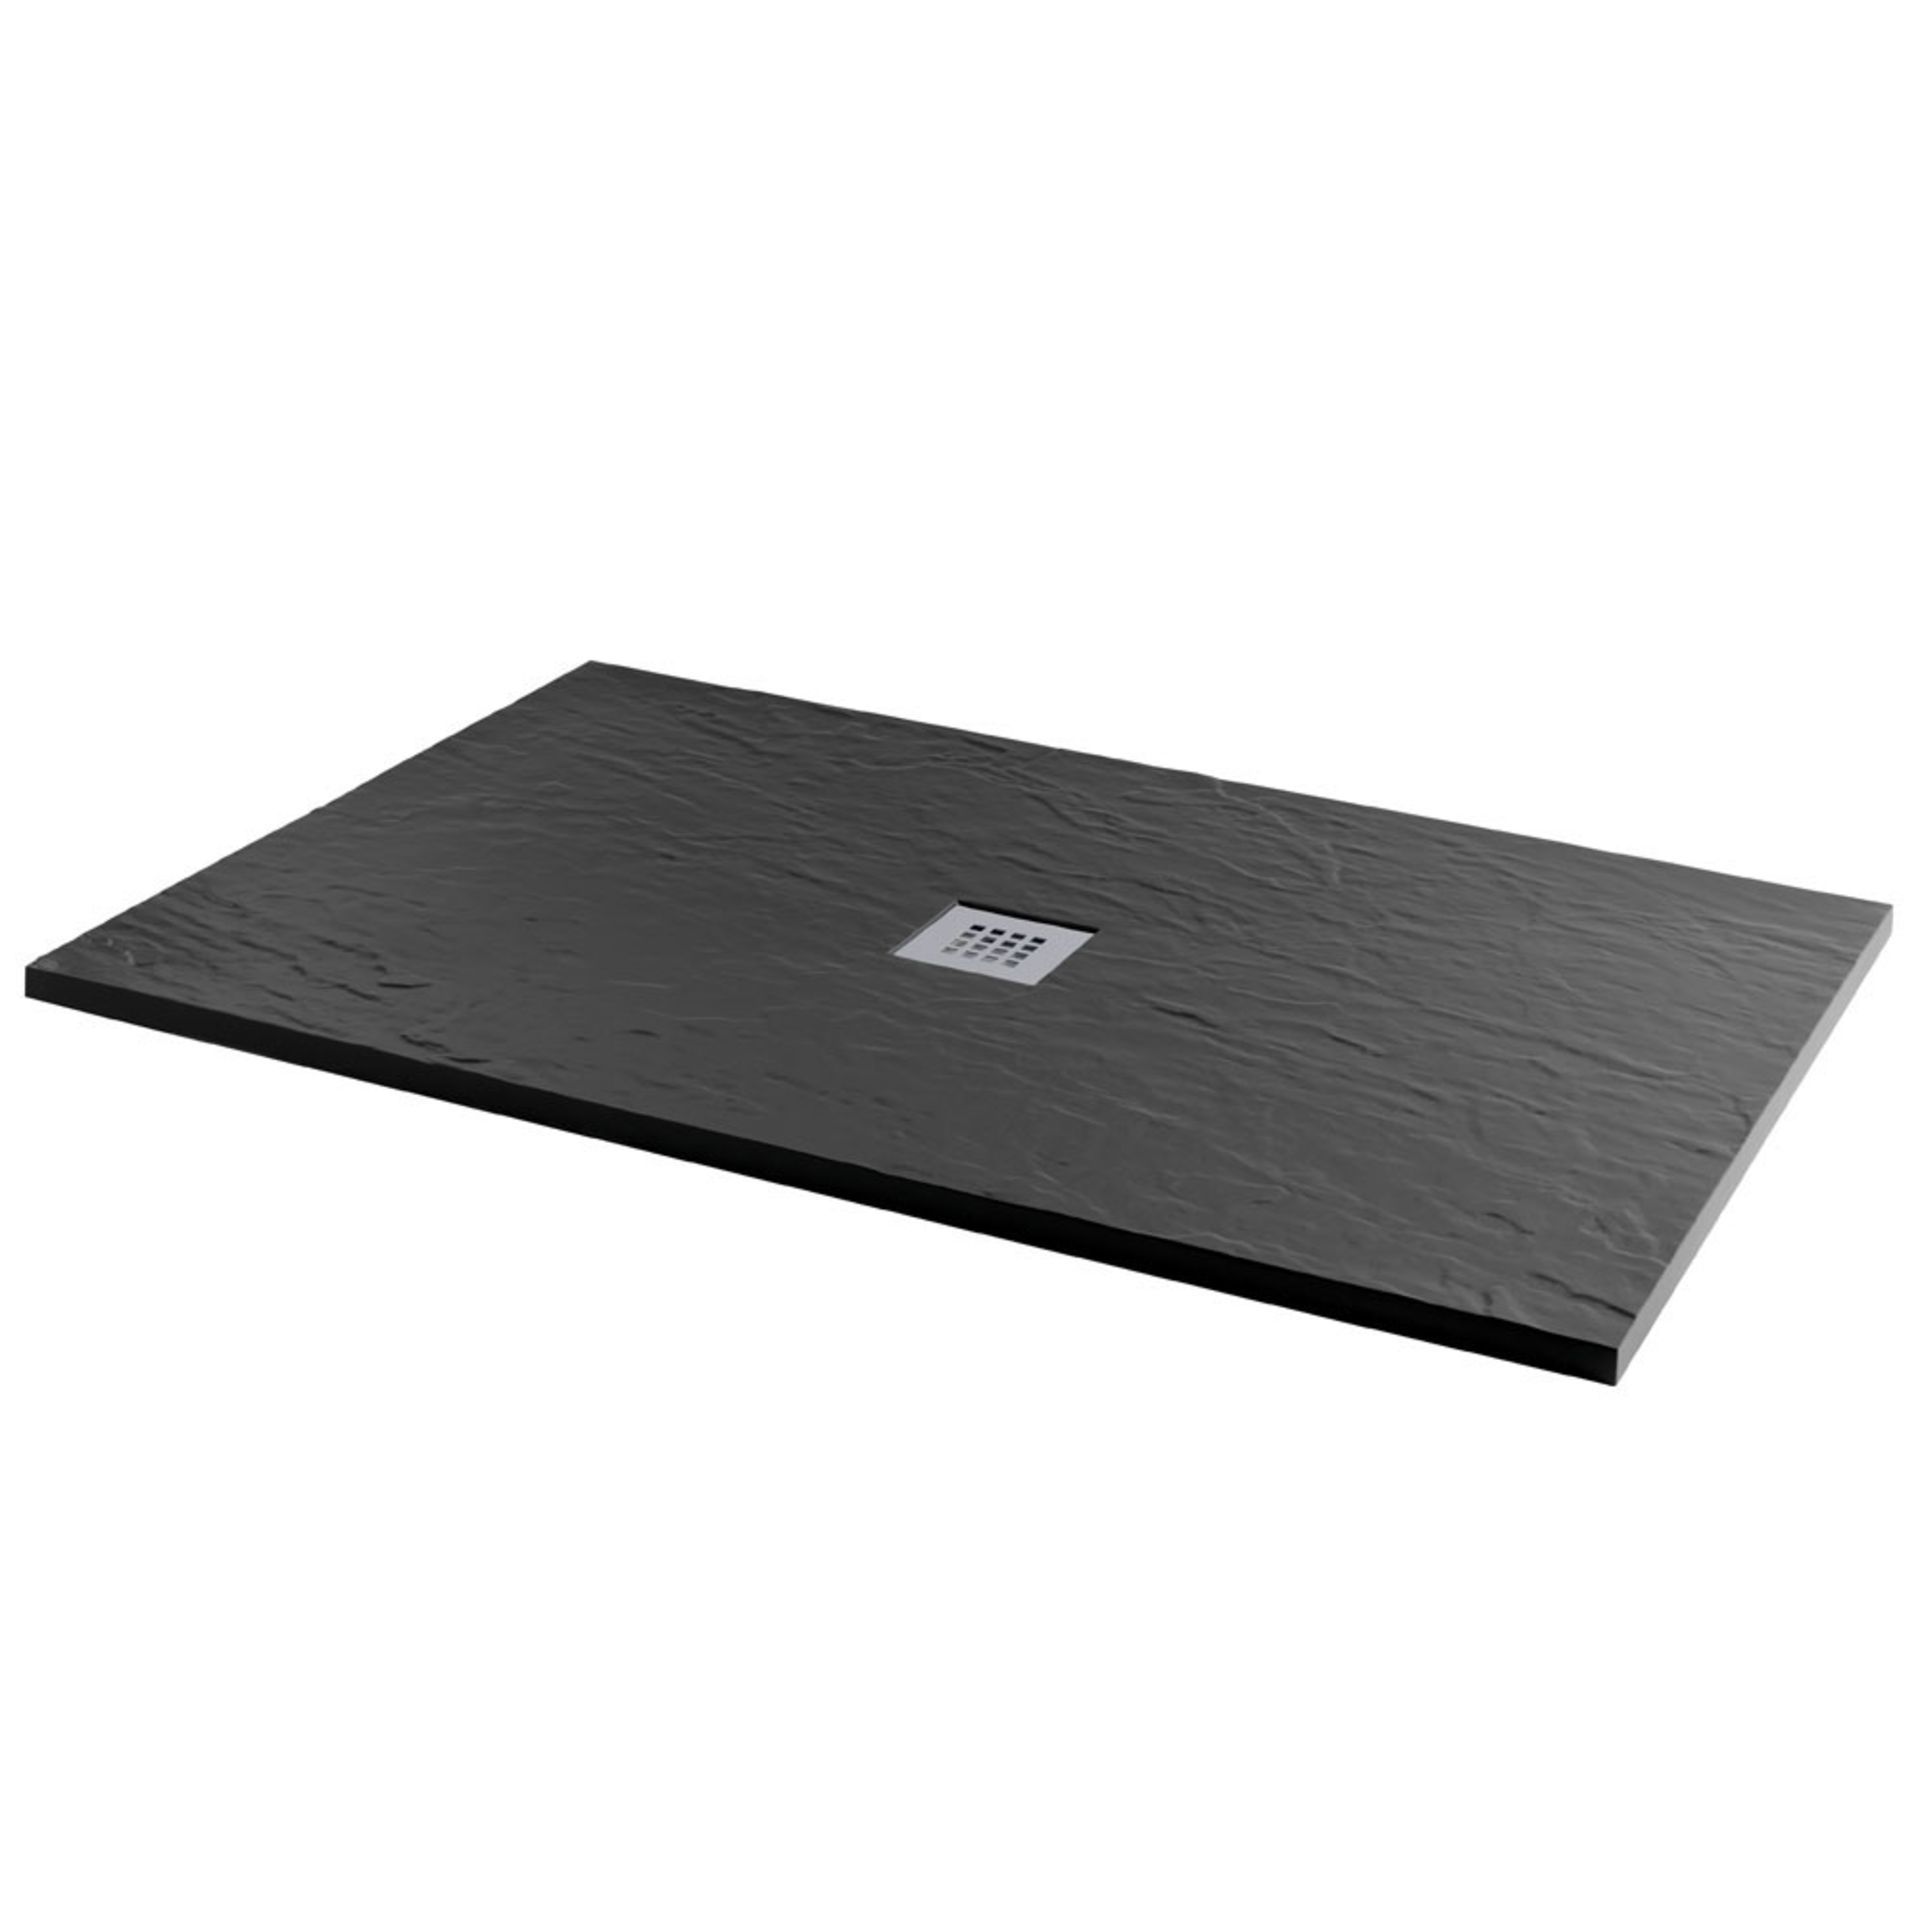 New 1200x800mm Rectangle Black Slate Effect Shower Tray. RRP £549.99.A Textured Black Slate E... - Image 2 of 2